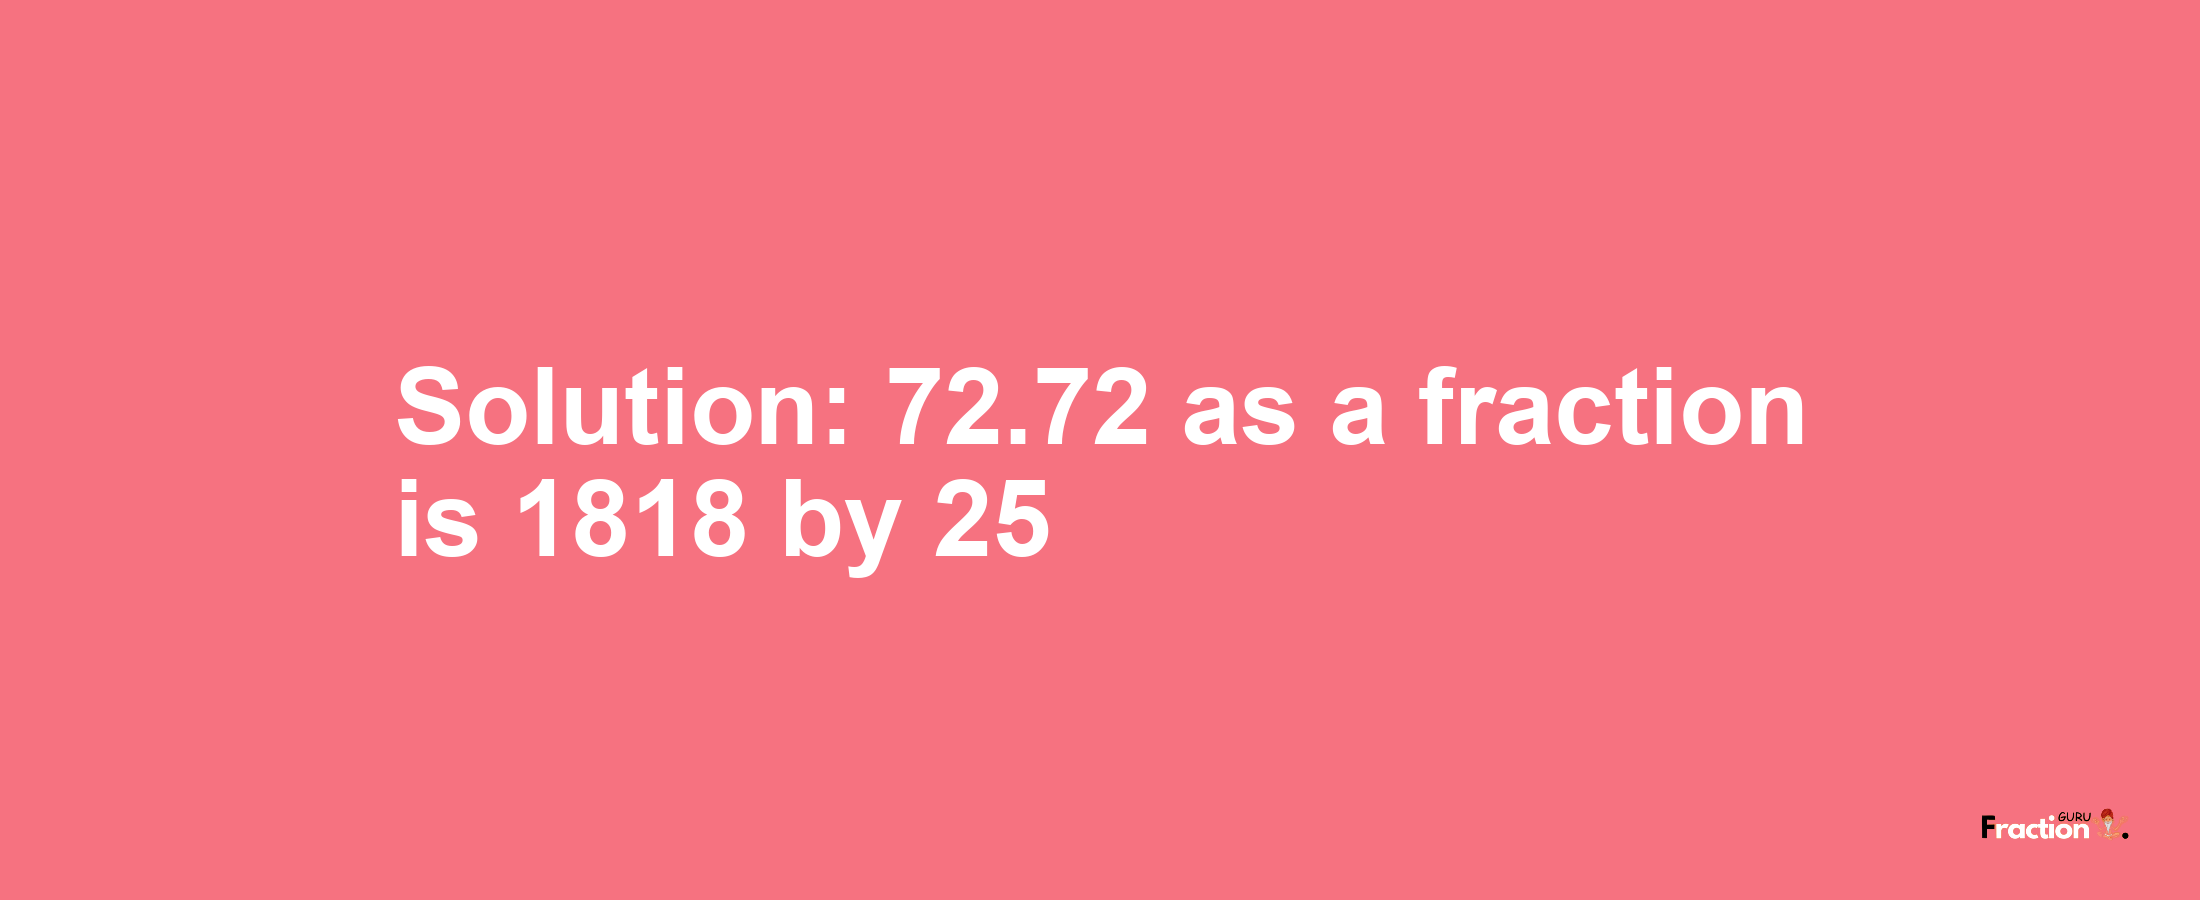 Solution:72.72 as a fraction is 1818/25